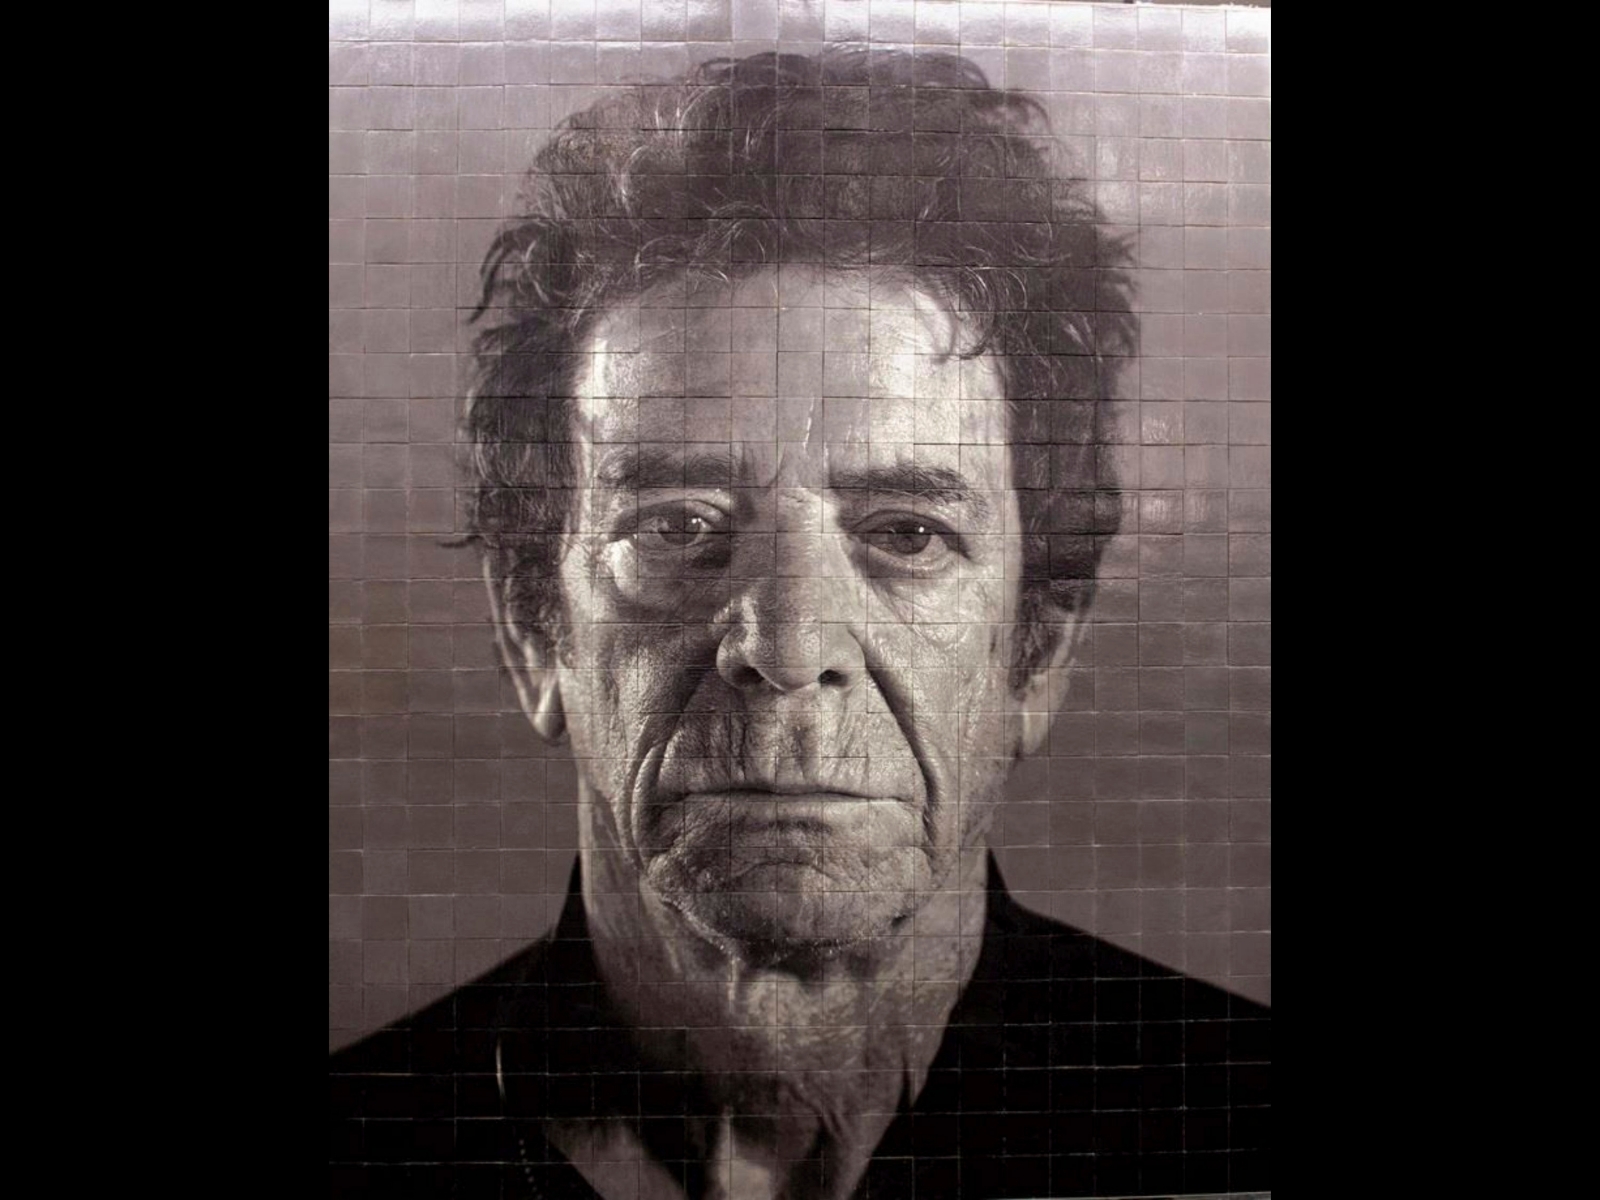 This 2016 photo provided by the Office of New York Gov. Andrew M. Cuomo shows a mosaic by Chuck Close of Lou Reed in the 86th St. station of the Second Avenue subway line in New York. The line, which opens Jan. 1, 2017, will have four stations, each with walls decorated with ceramic-tile or mosaic pieces by one of the four artists: Chuck Close, Sarah Sze, Jean Shin and Vik Muniz. (MTA/Office of New York Gov. Cuomo via AP) Second Avenue Subway Public Art